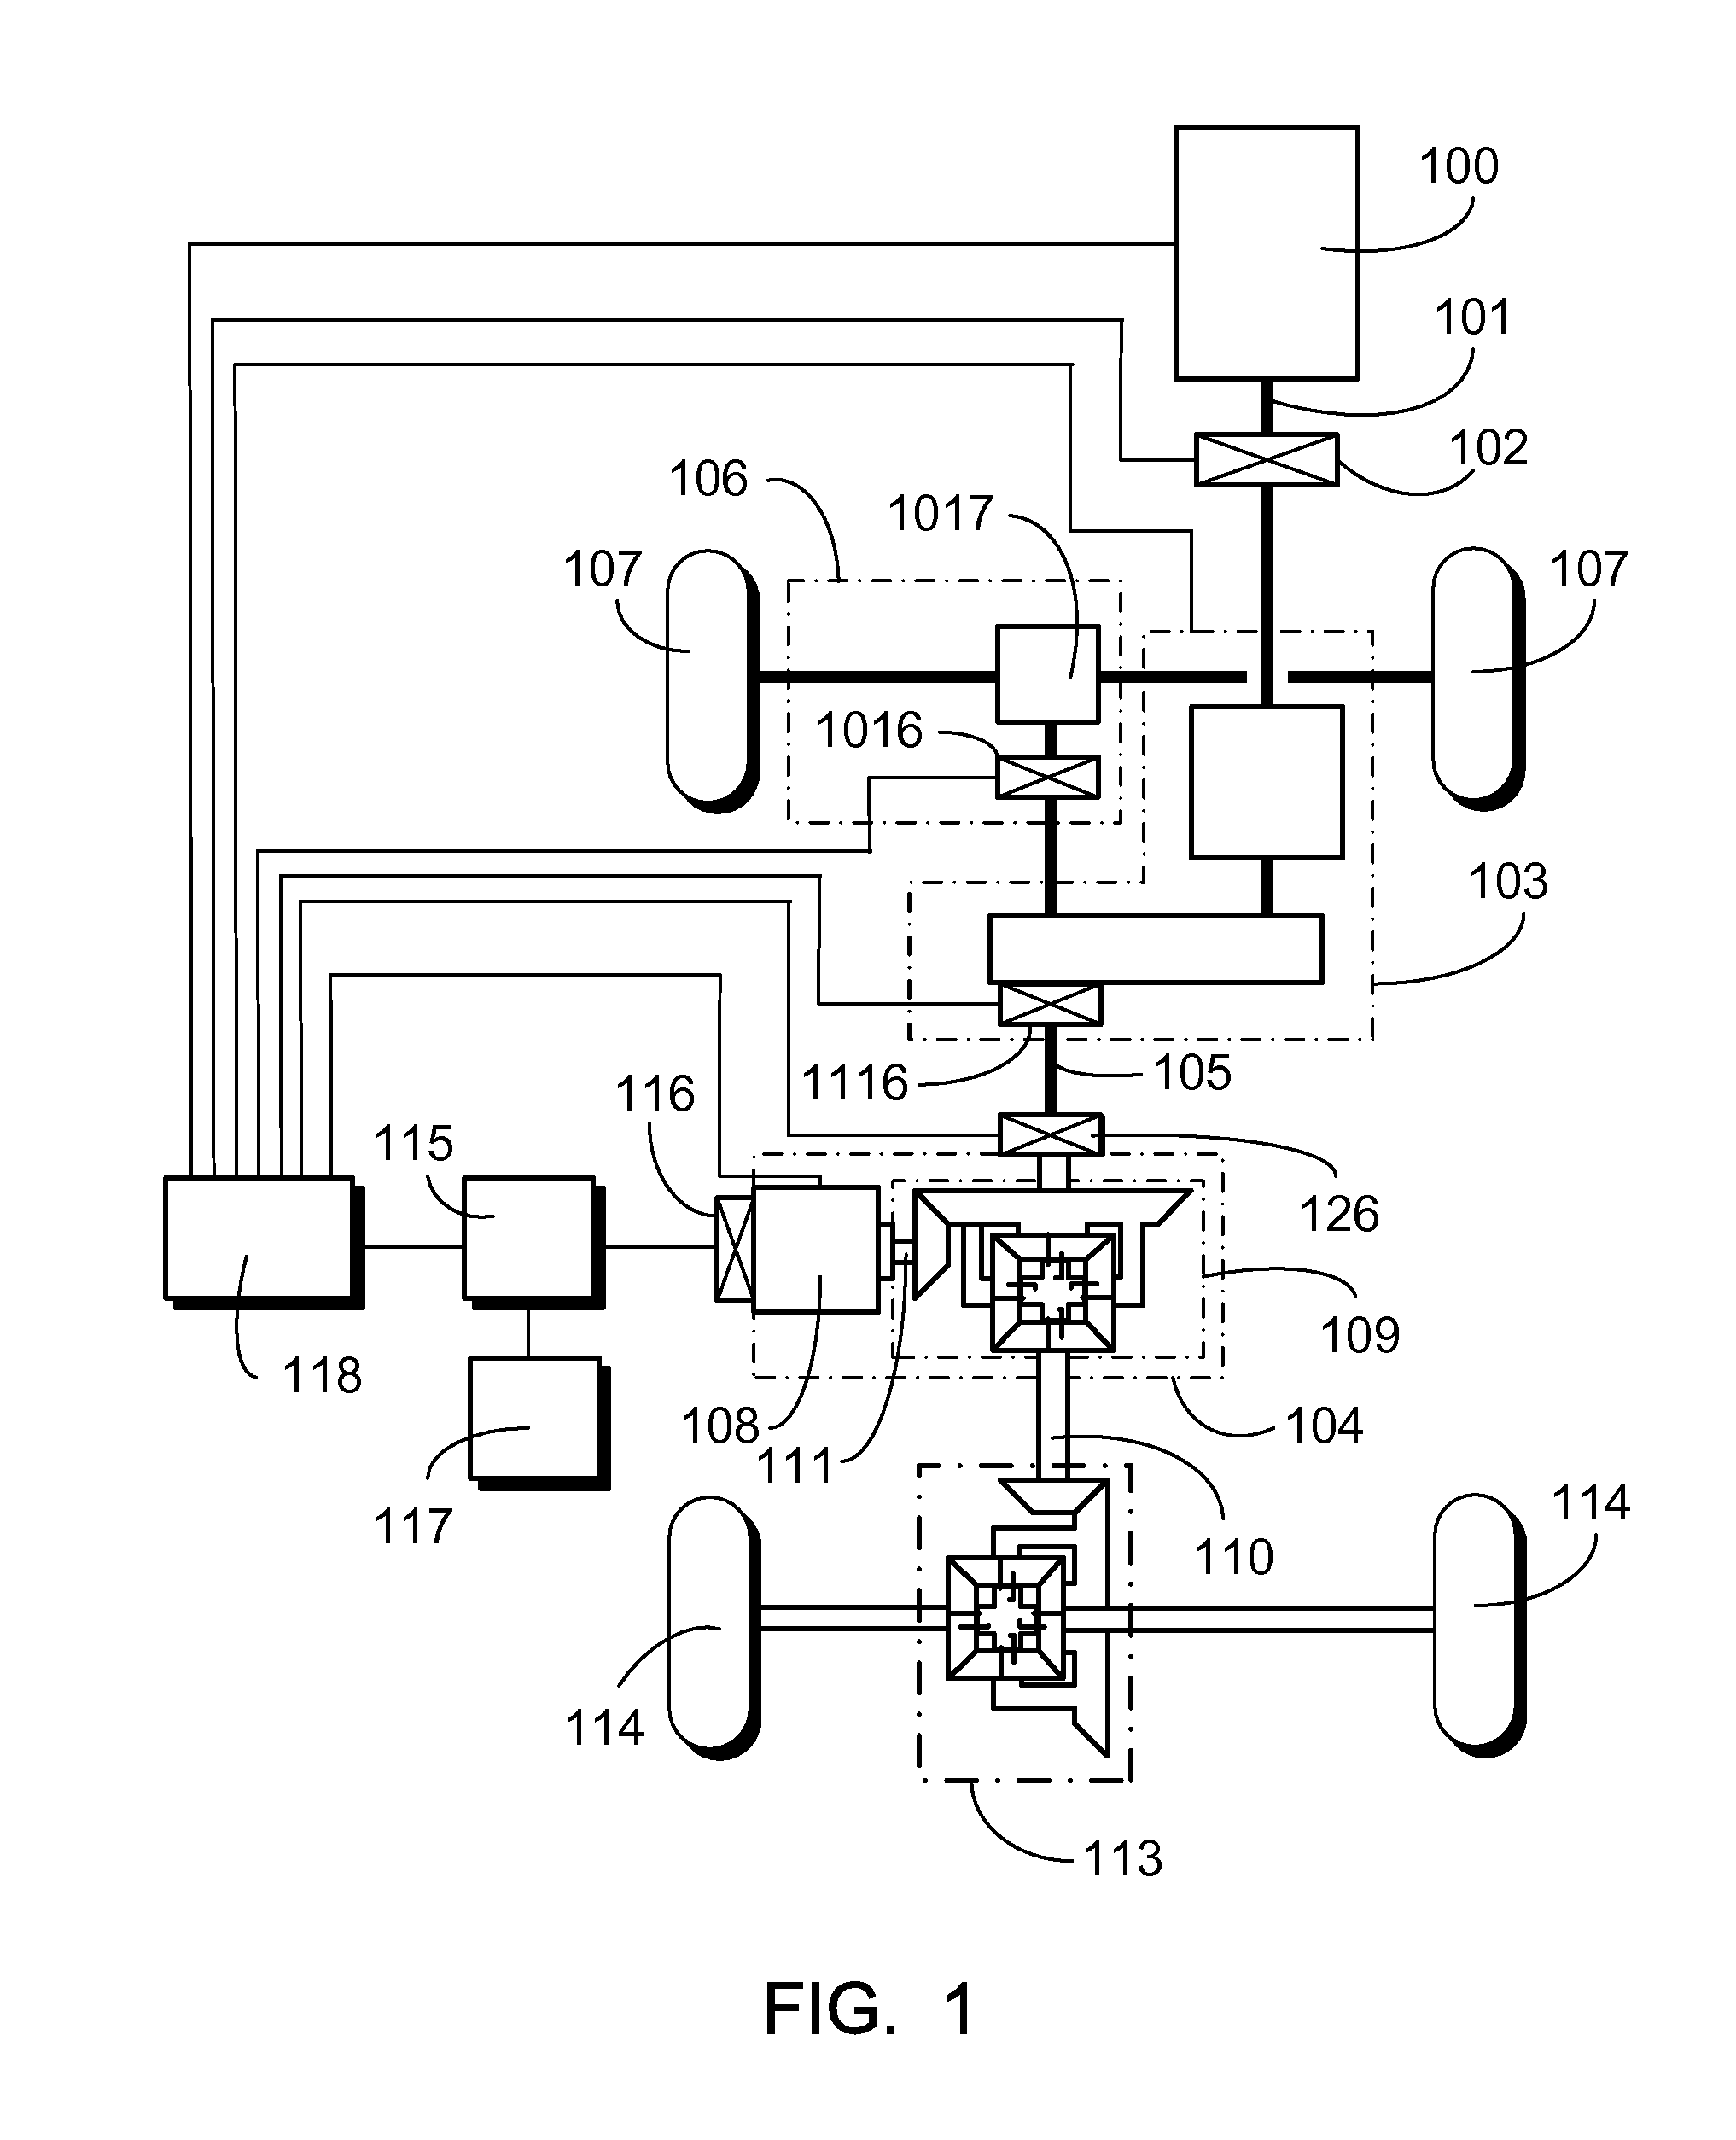 Energy storage type of differential hybrid power distribution system